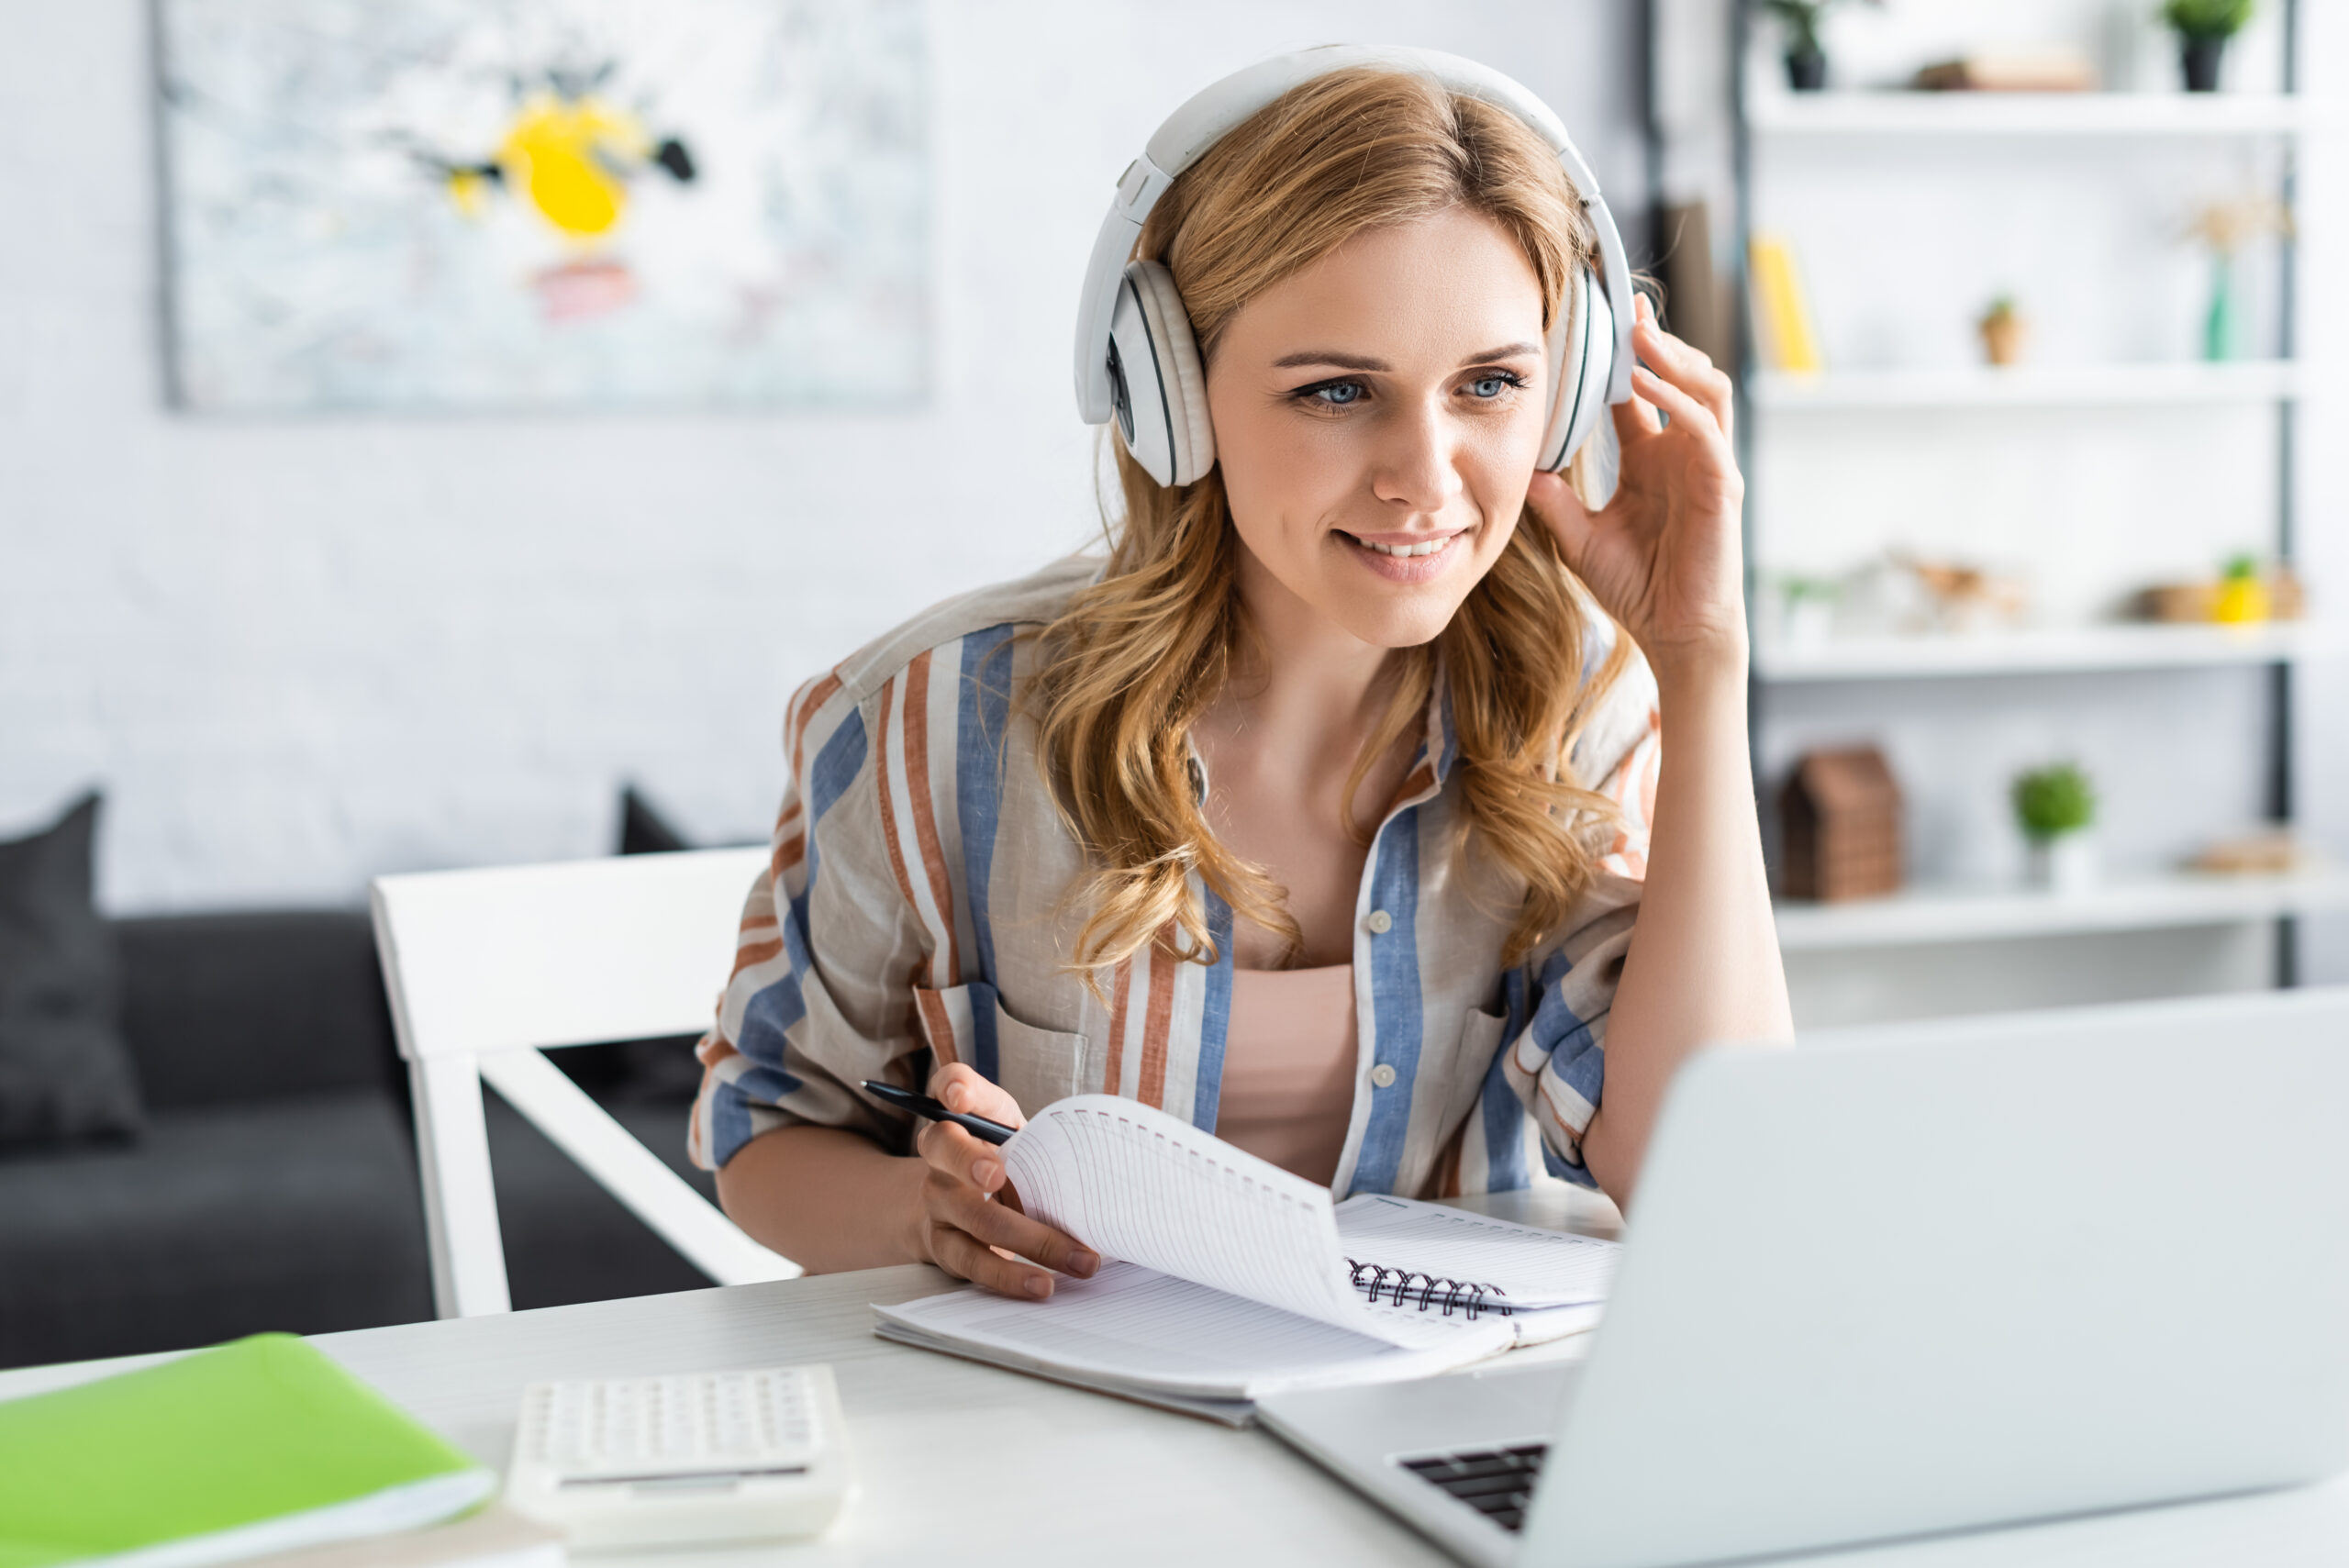 Woman with headphones in front of laptop during e-learning